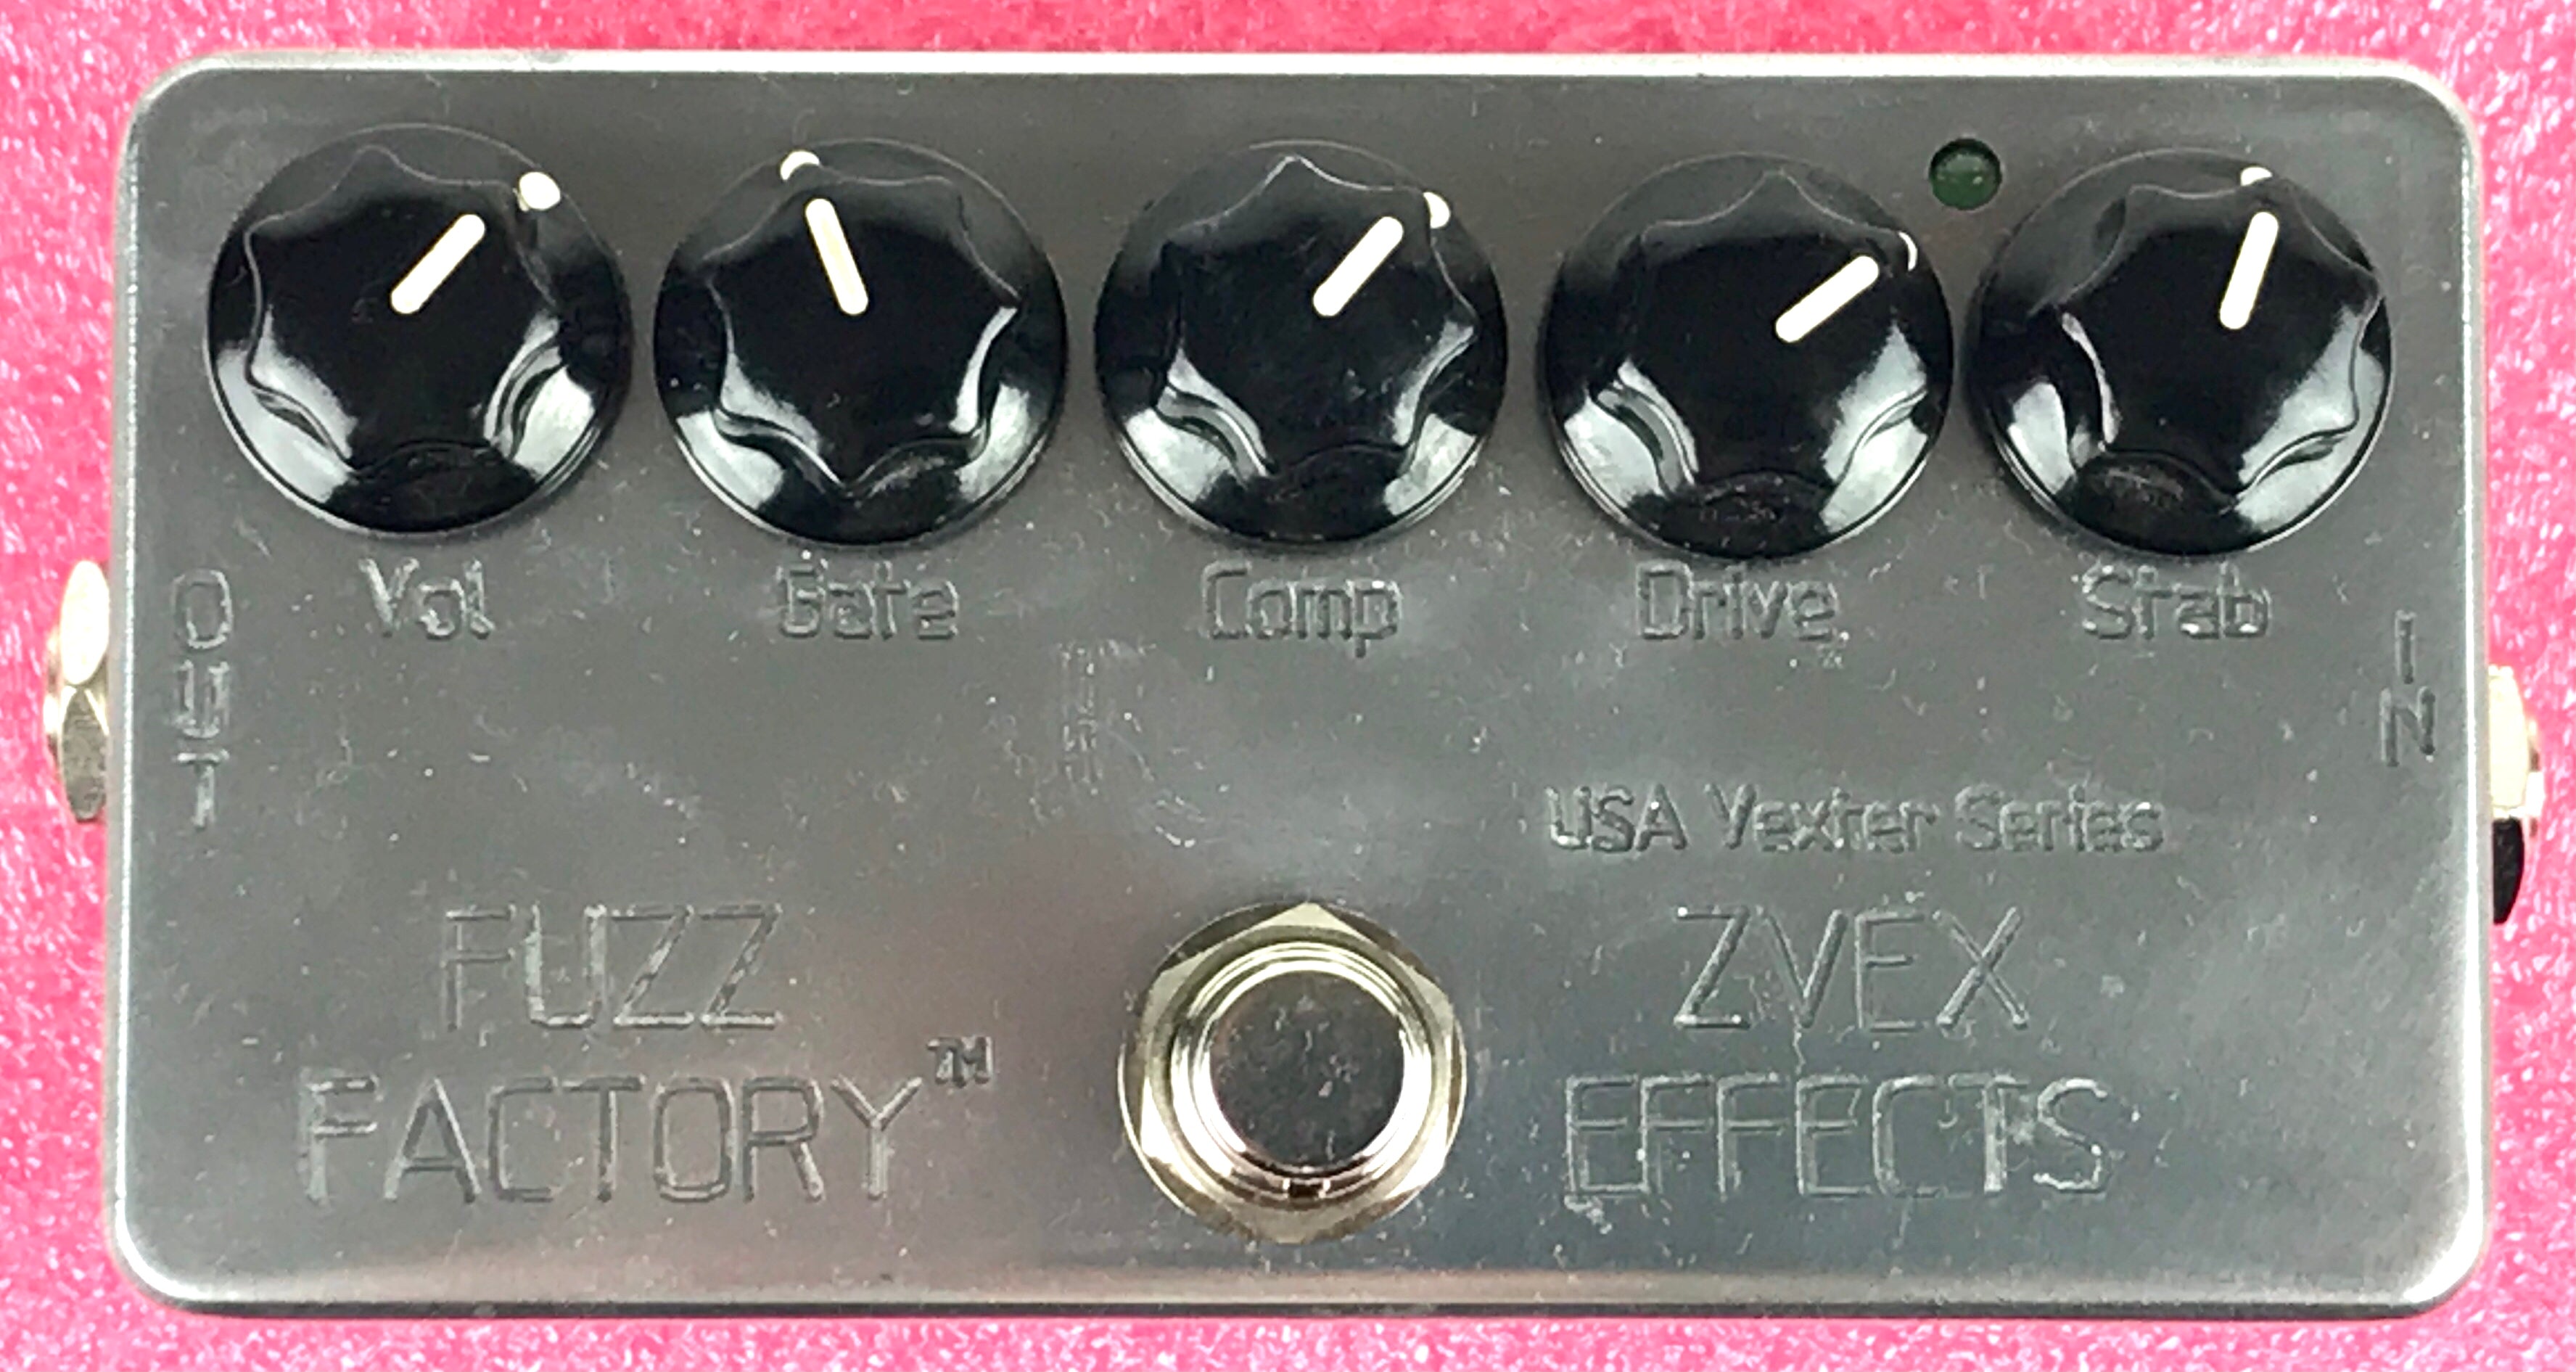 American Vexter Fuzz Factory, brand new, old stock (N.O.S.)! – Big